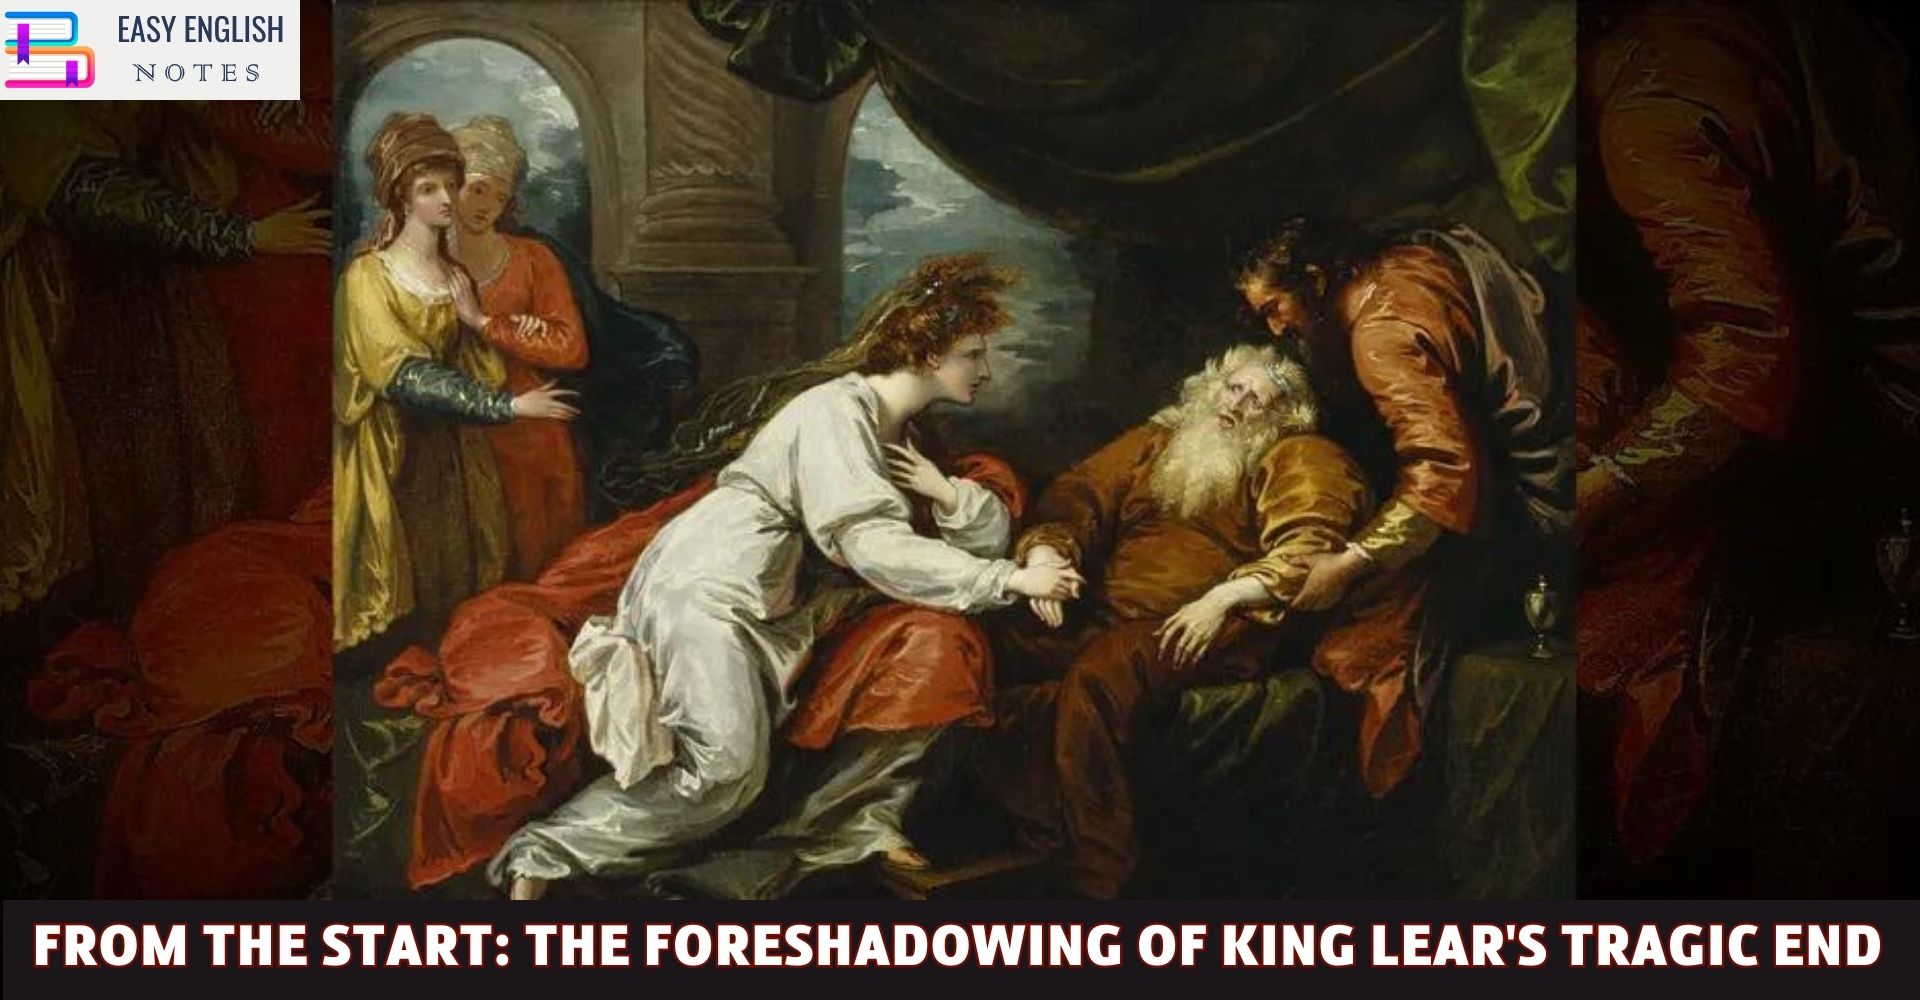 From the Start: The Foreshadowing of King Lear's Tragic End